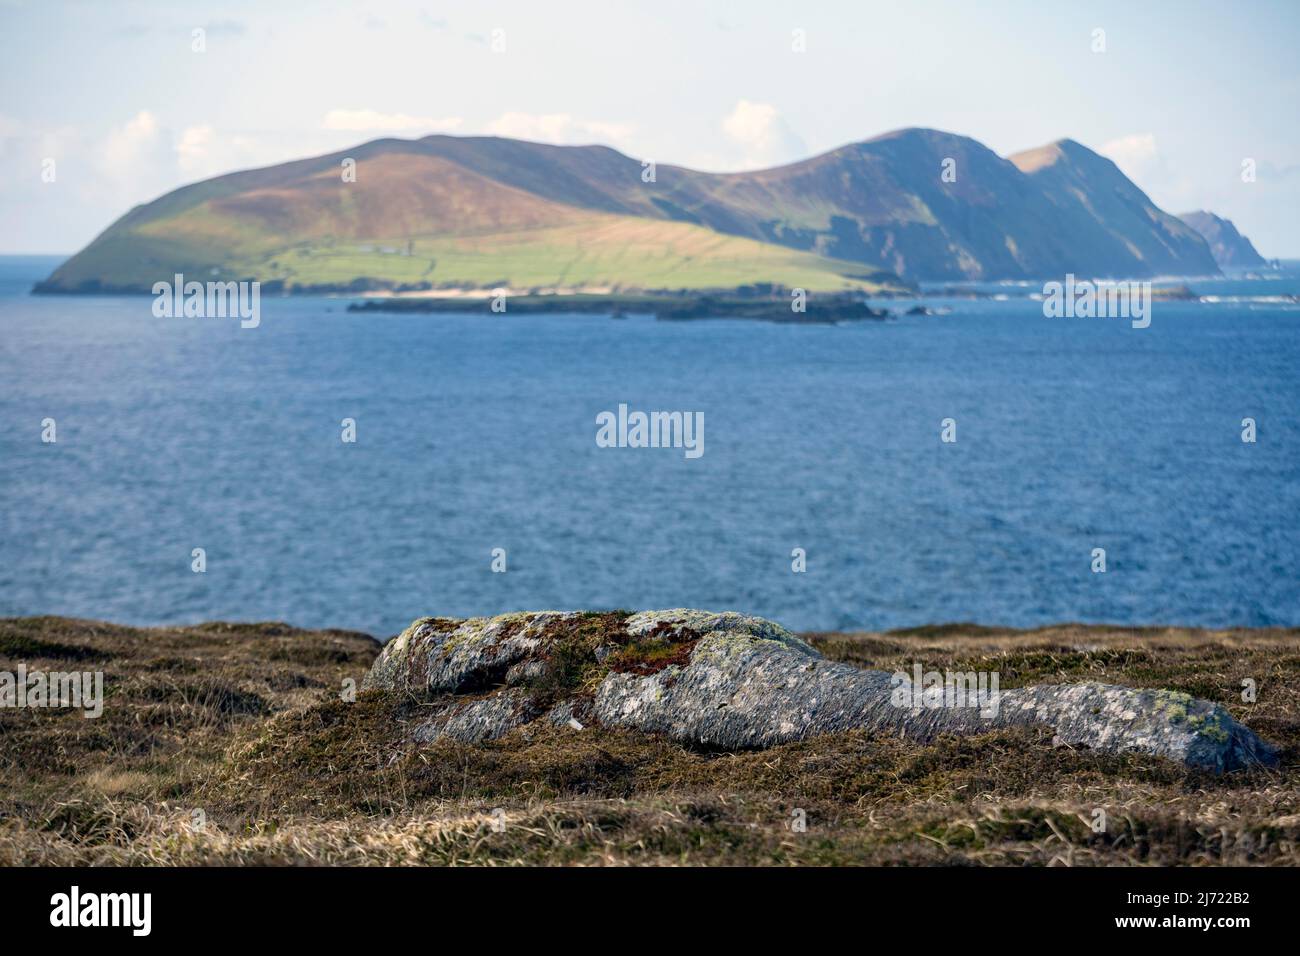 Beautiful landscape in the West Kerry Gaeltacht showing the Great Blasket Island in the distance, County Kerry, Munster, Ireland Stock Photo